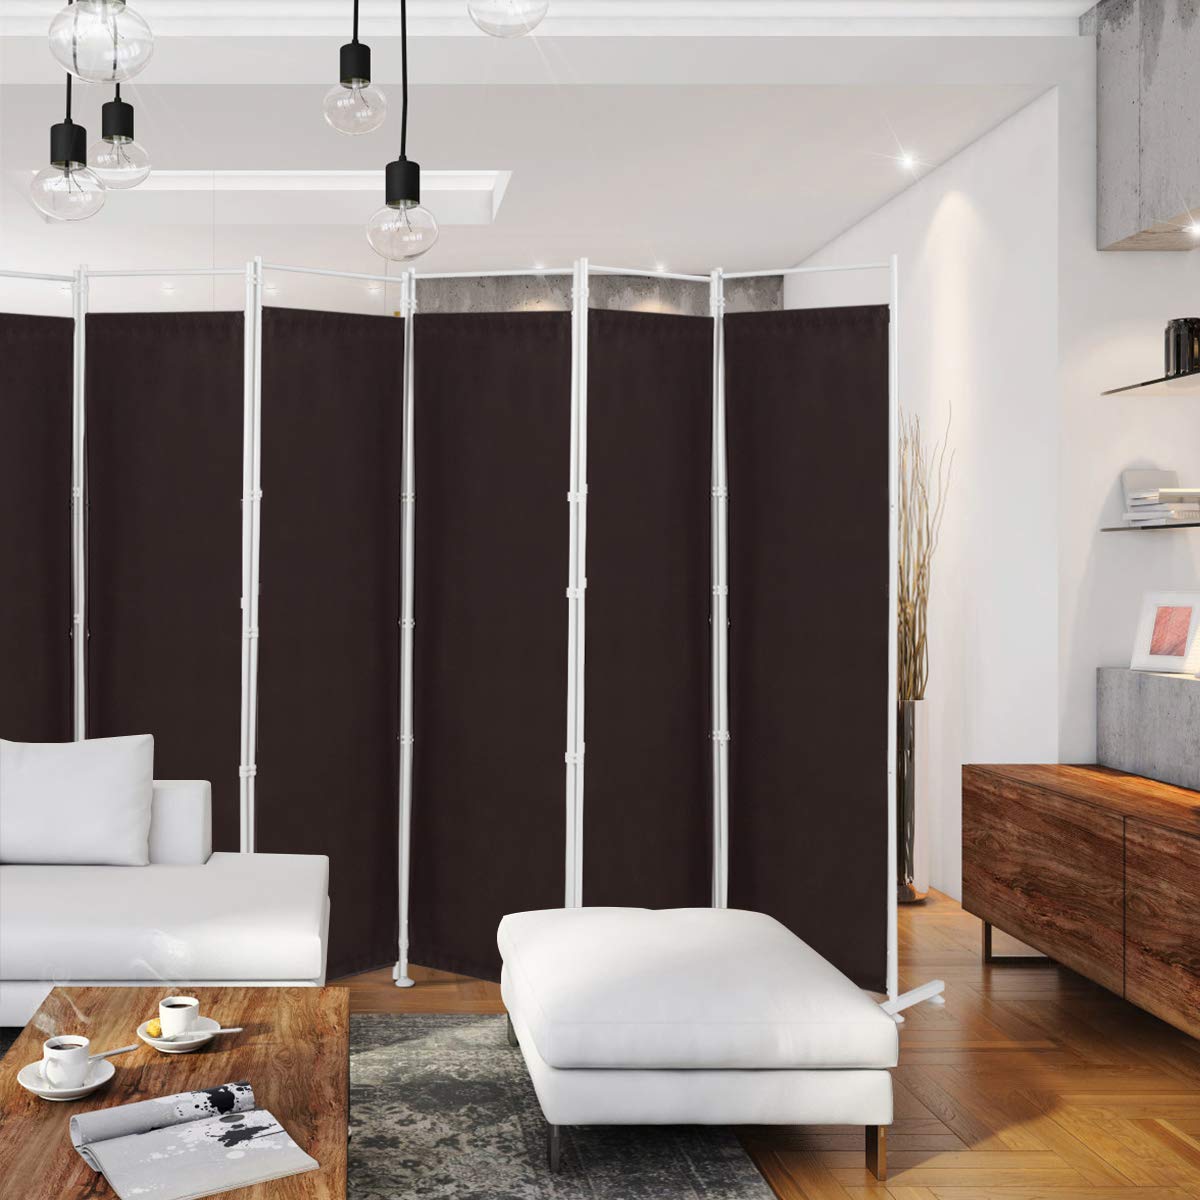 Giantex 6 Panel Room Divider, 6 Ft Folding Screen with Steel Support Base